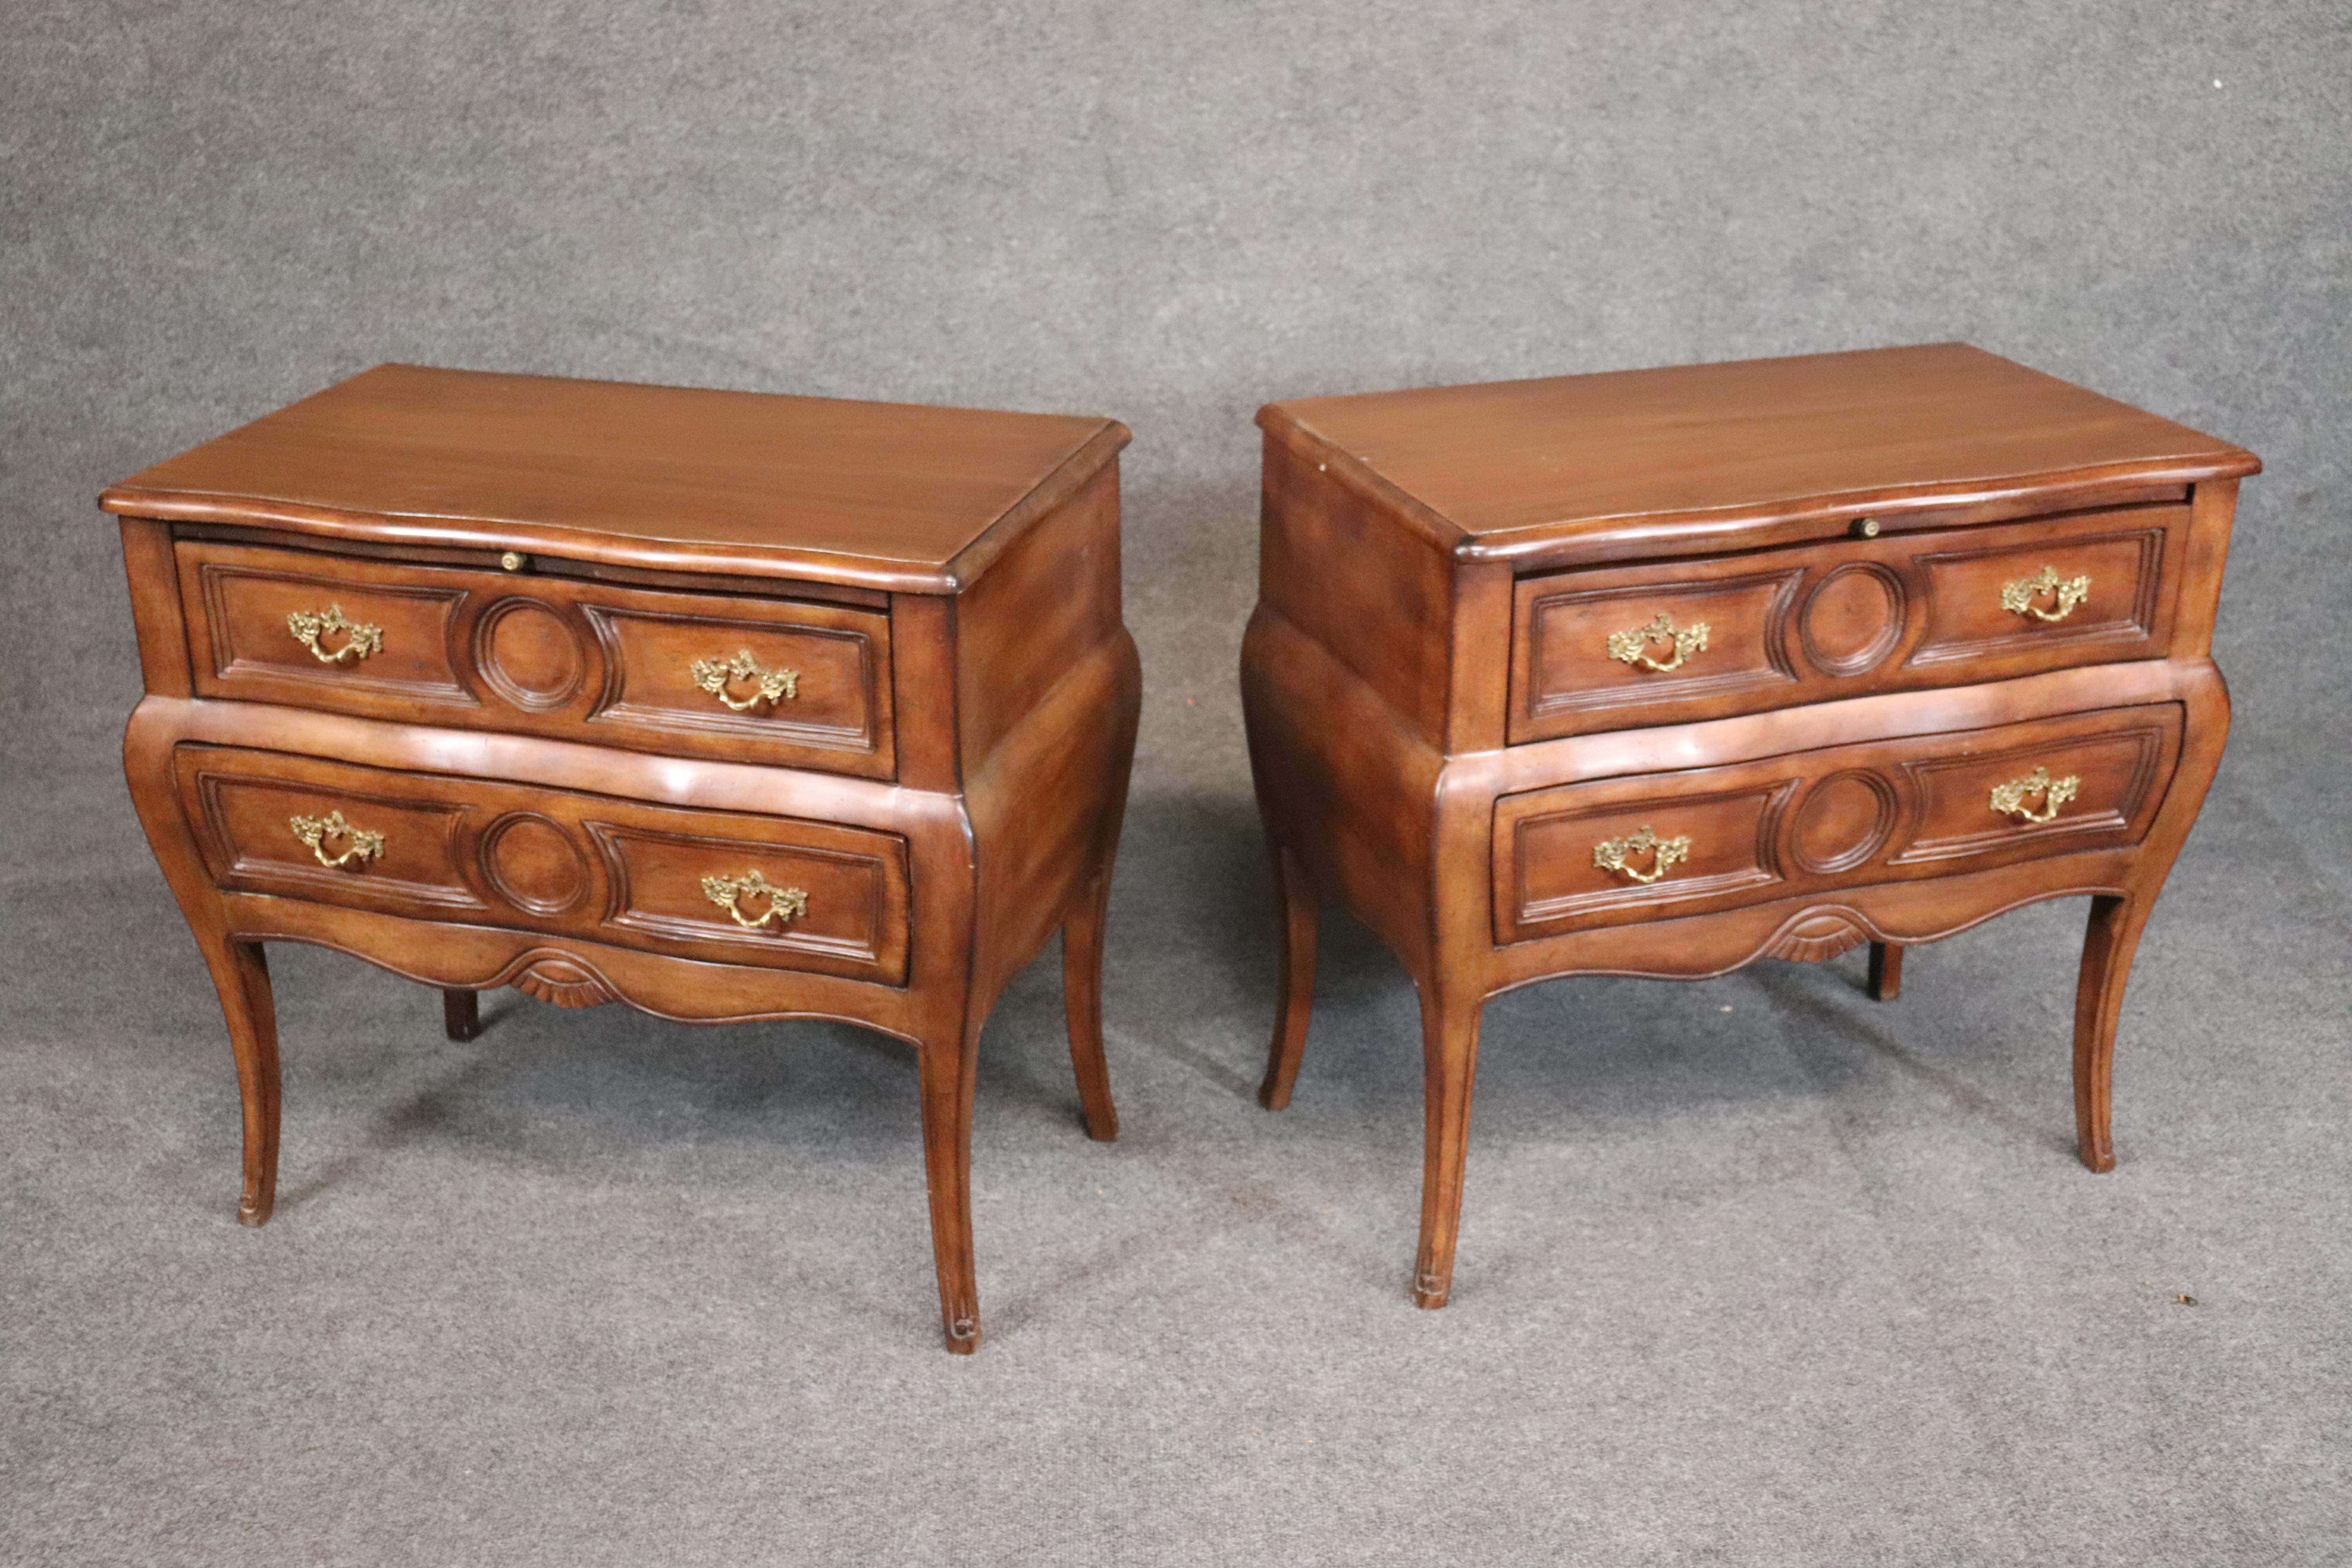 This is a fine pair of Italian-made commodes. Each one fitted with slide out trays for additional utility. They are designed in the Italian provincial manner. They each measure 30 wide x 28.25 tall x 17 deep.